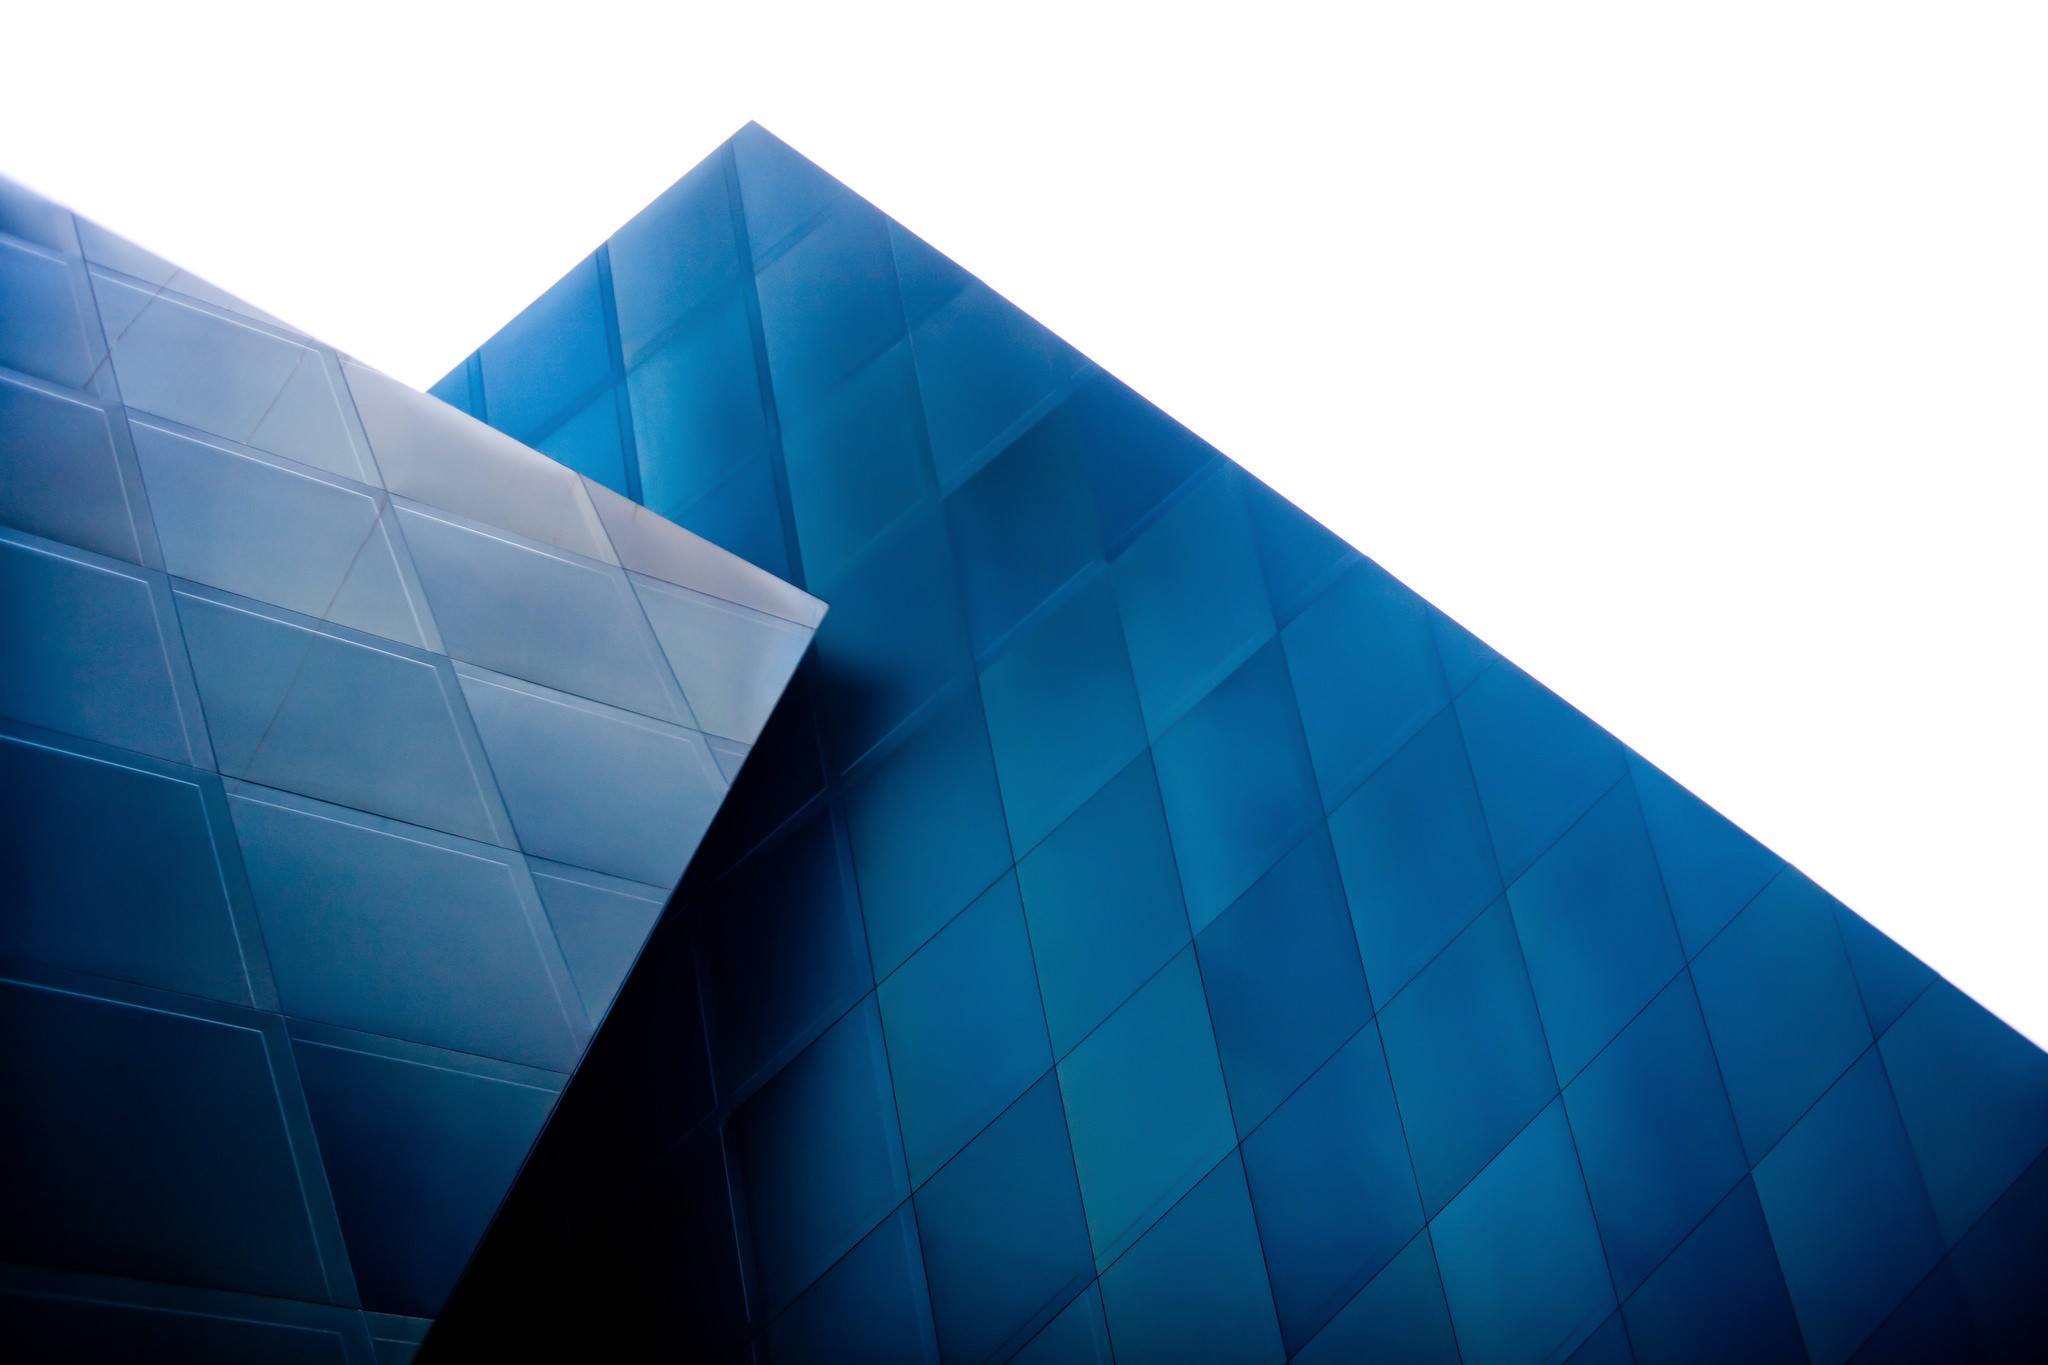 General 2048x1365 photography architecture abstract blue sky facade